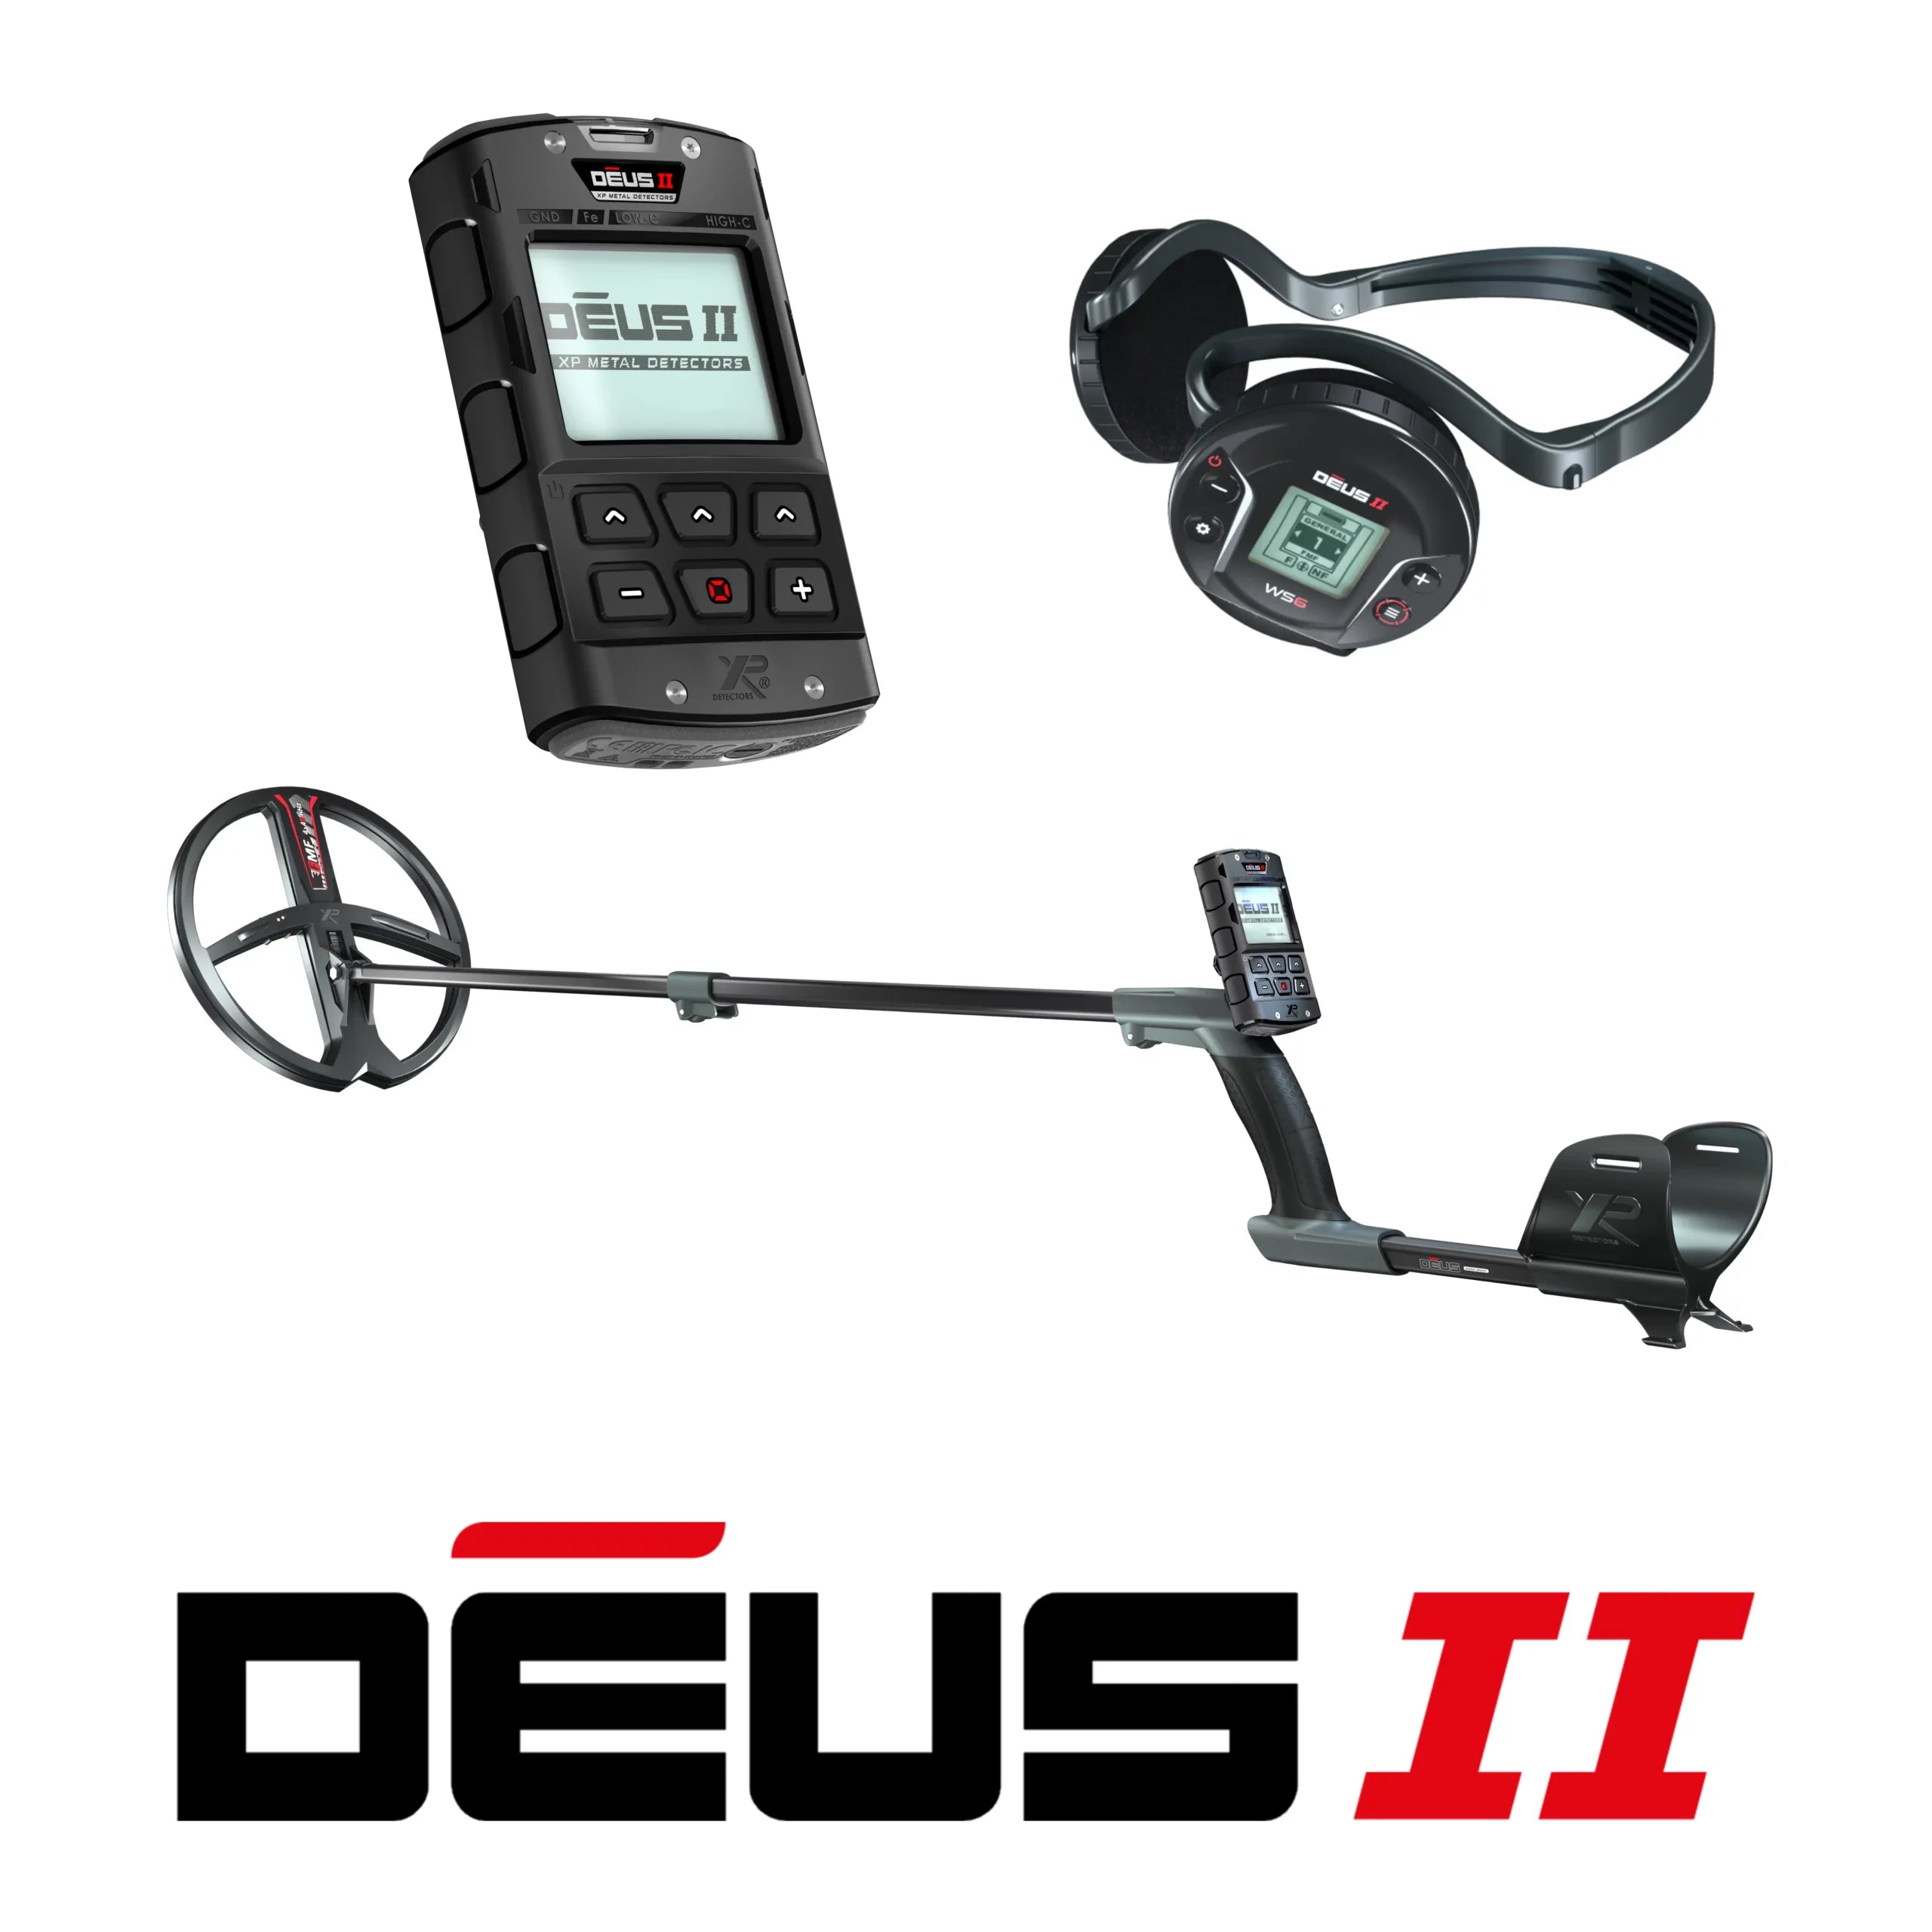 XP Deus II with 13×11″ Multi-Frequency Coil, Remote, and Wireless